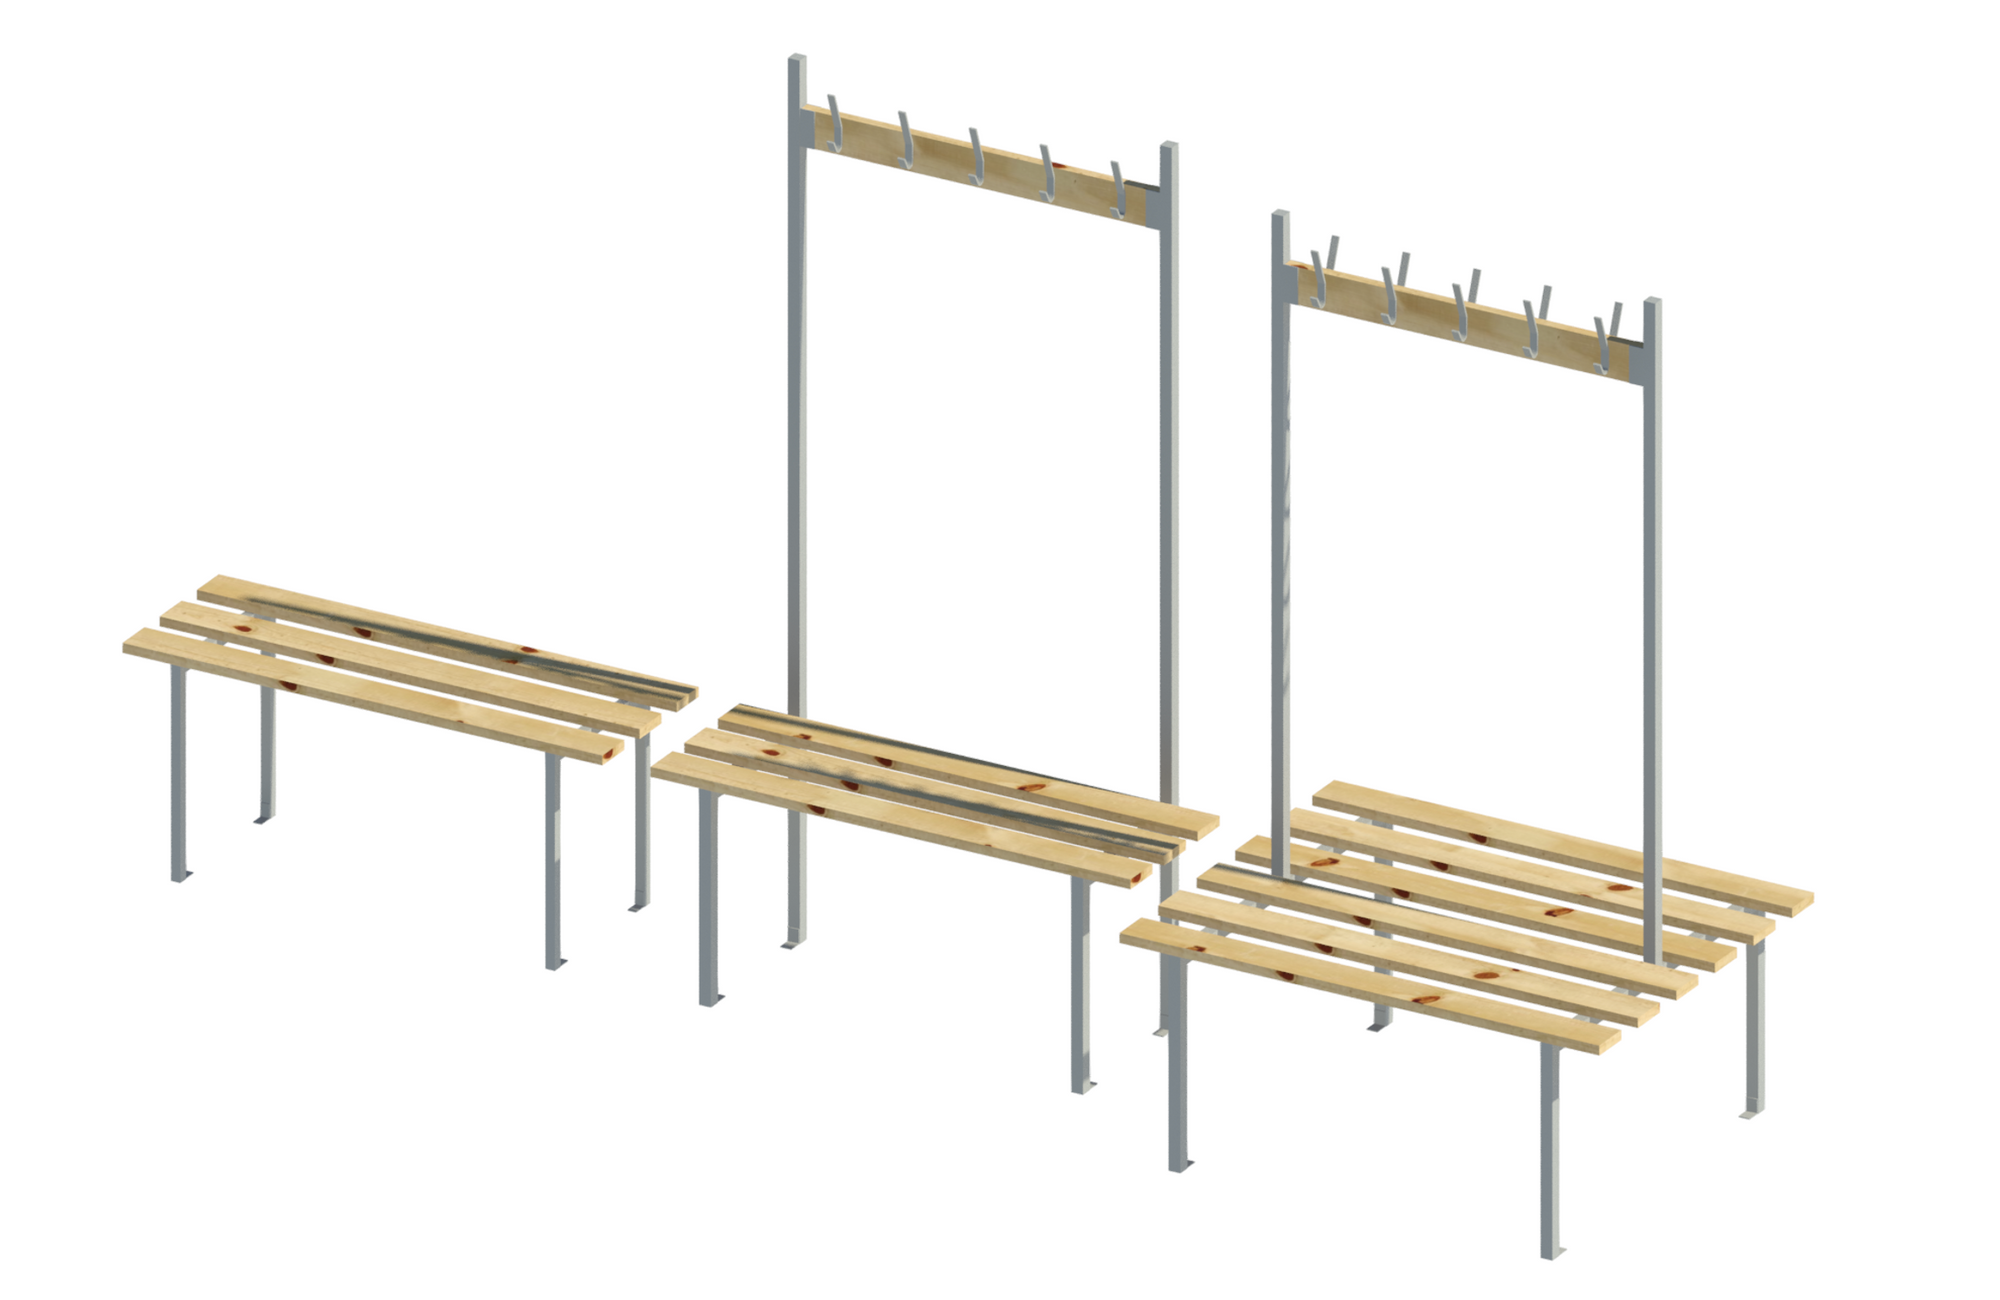 Revit families for single bench, single bench with hooks and double bench with hooks.